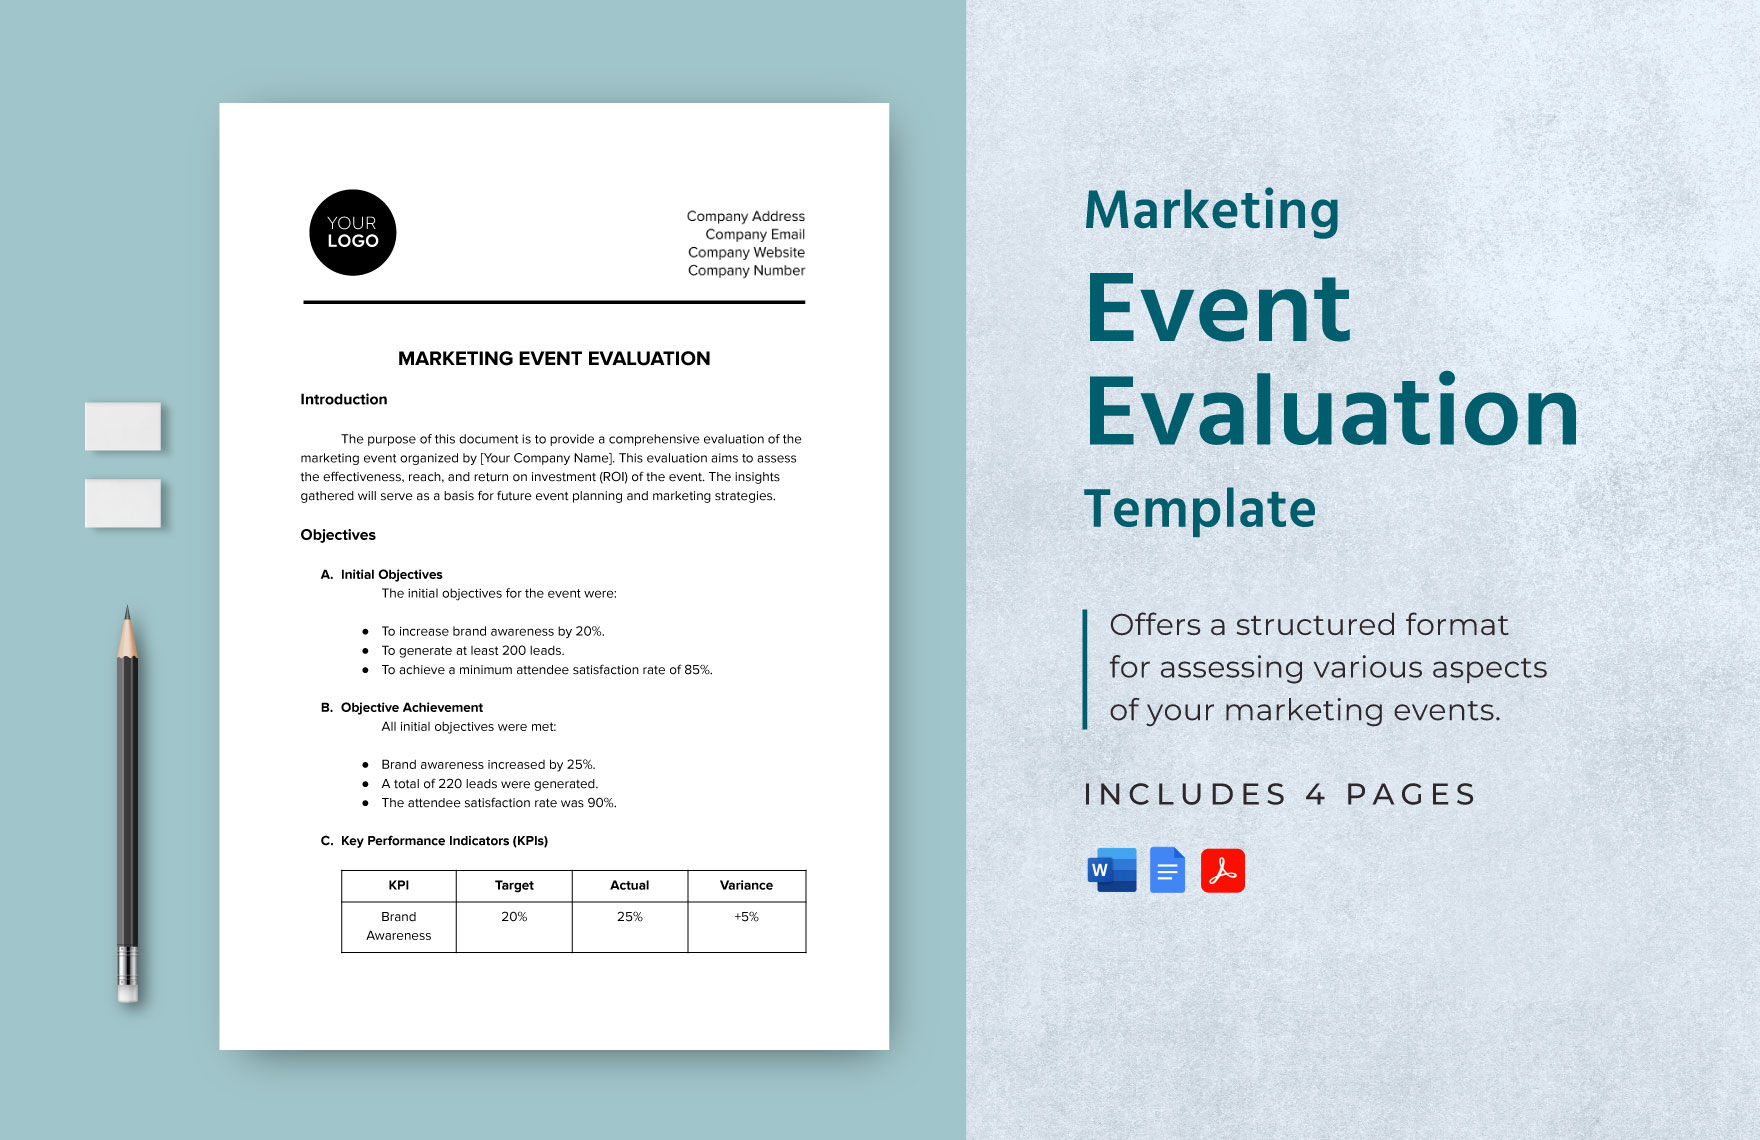 Marketing Event Evaluation Template in Word, Google Docs, PDF